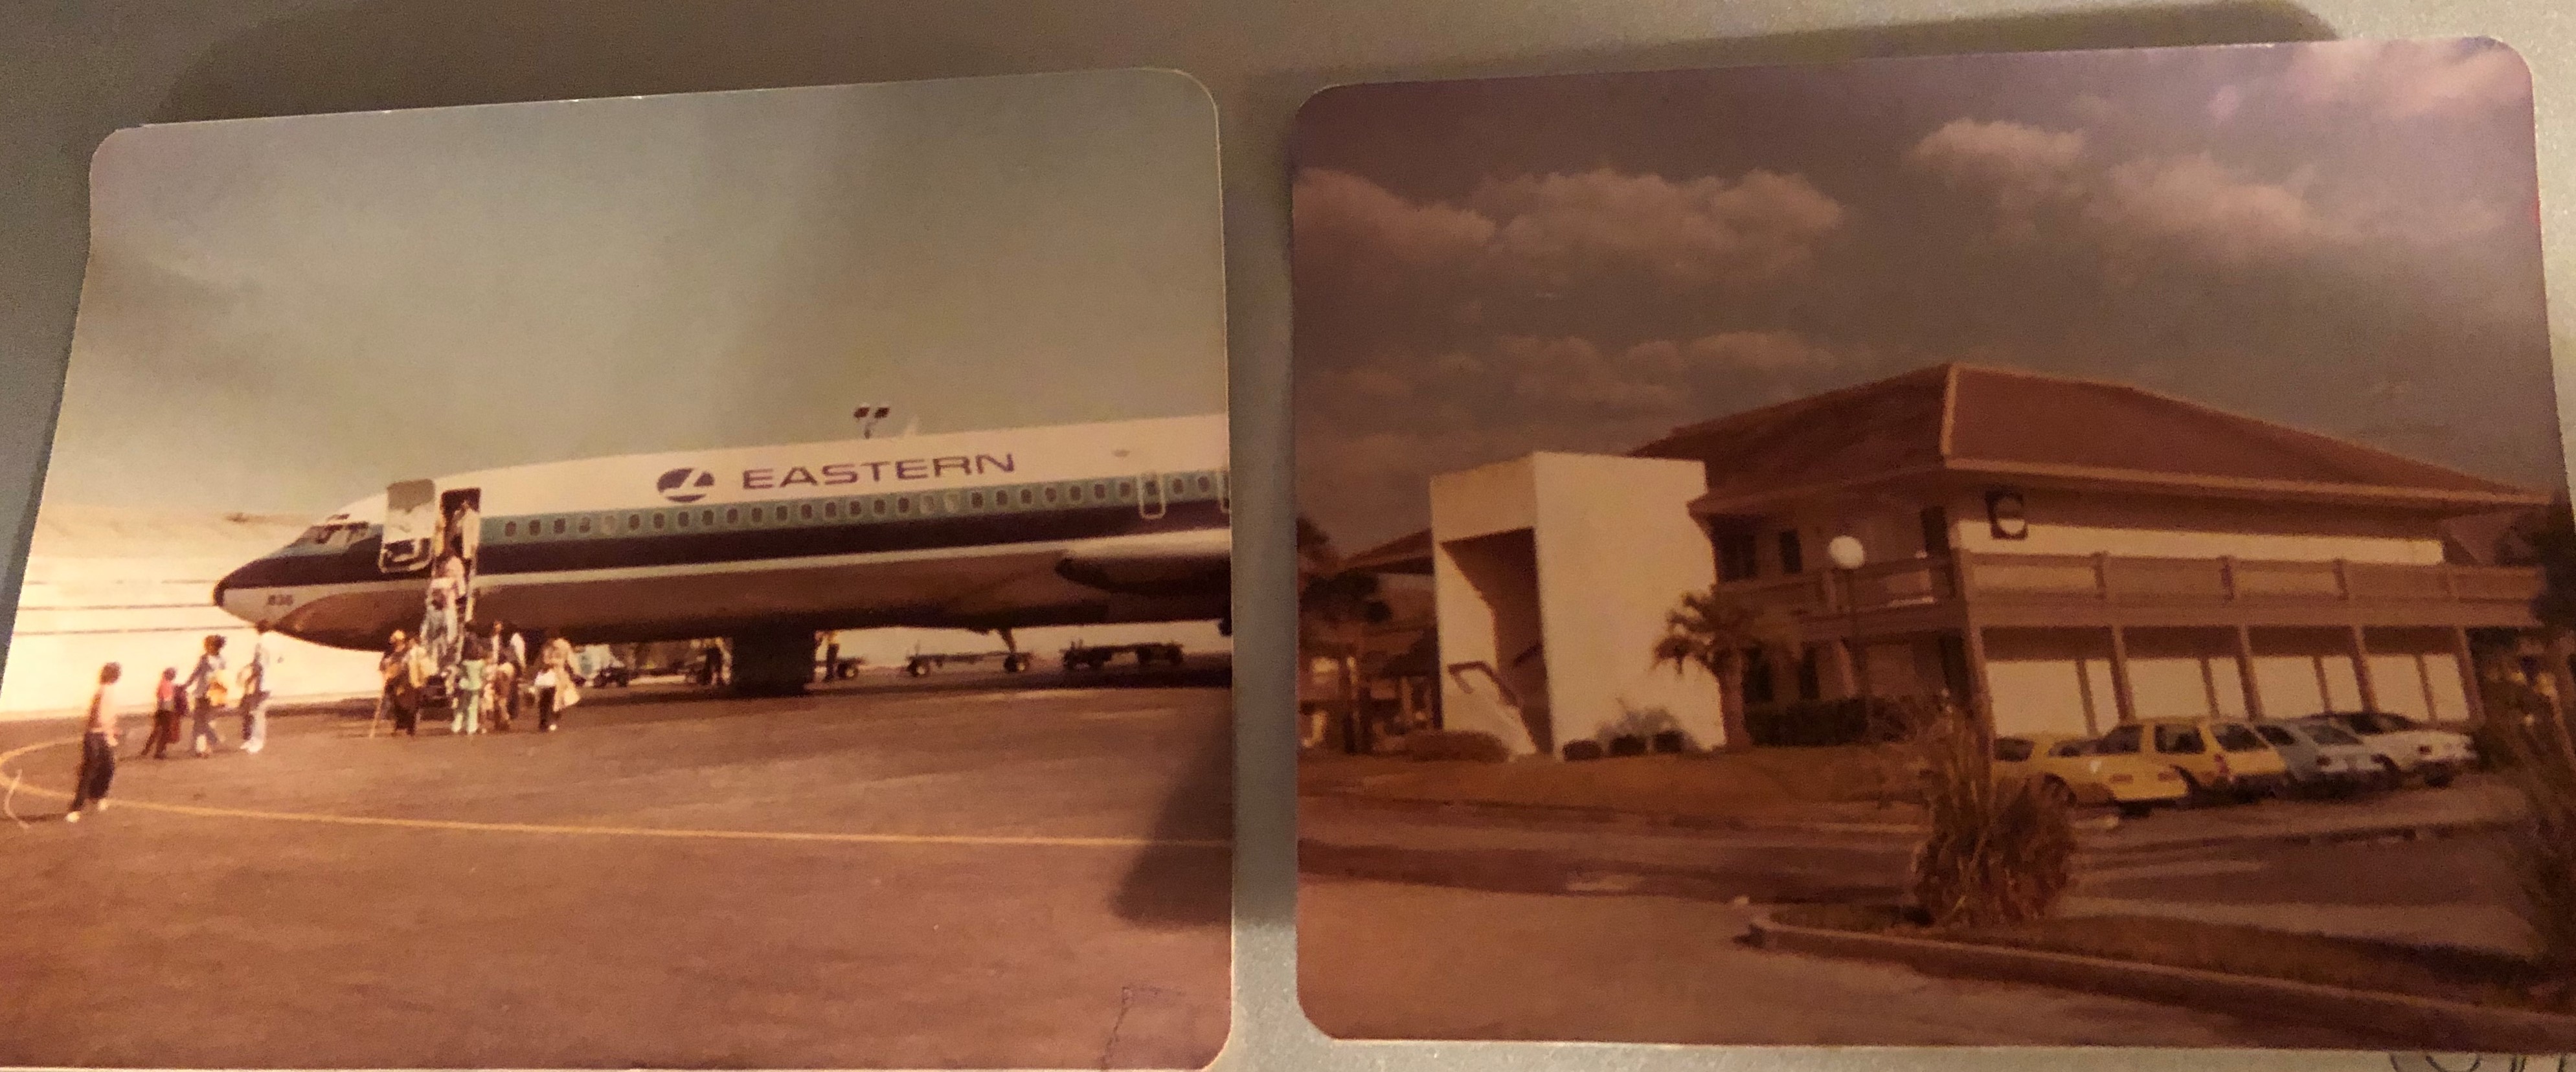 Pittsburgh to Orlando on Eastern Airlines